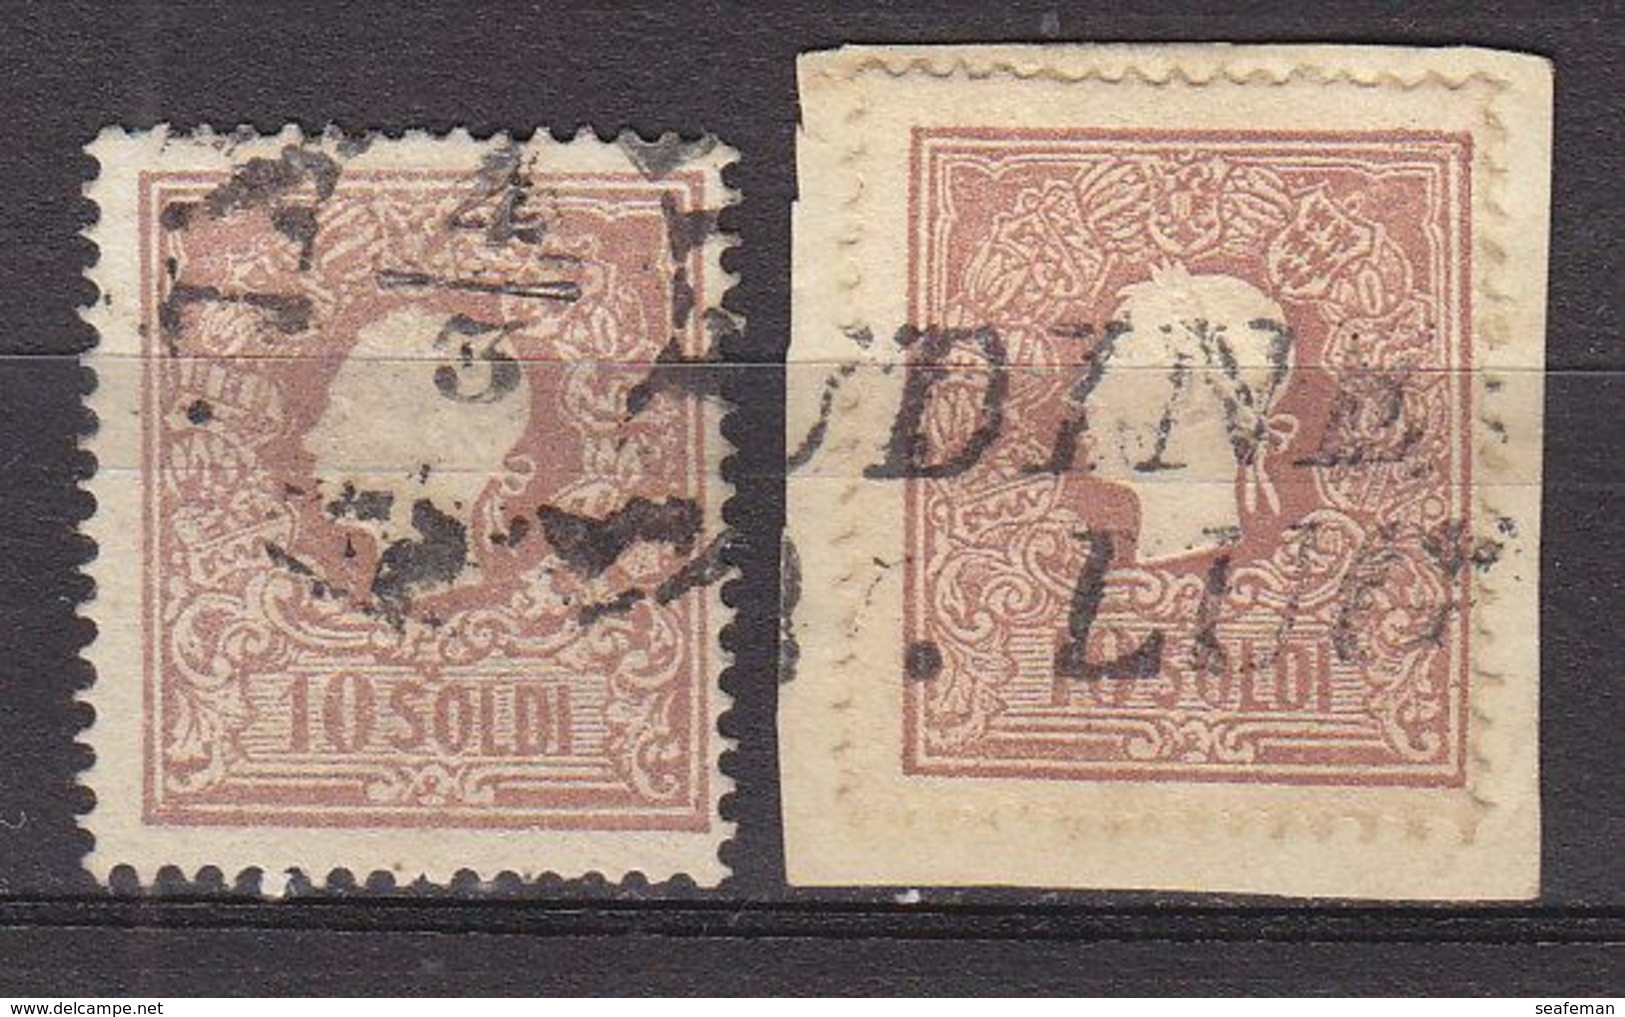 LOMBARDO-VENETIE,CRETA,LEVANT,mostly good quality,with better stamps,see 20 scans [9]